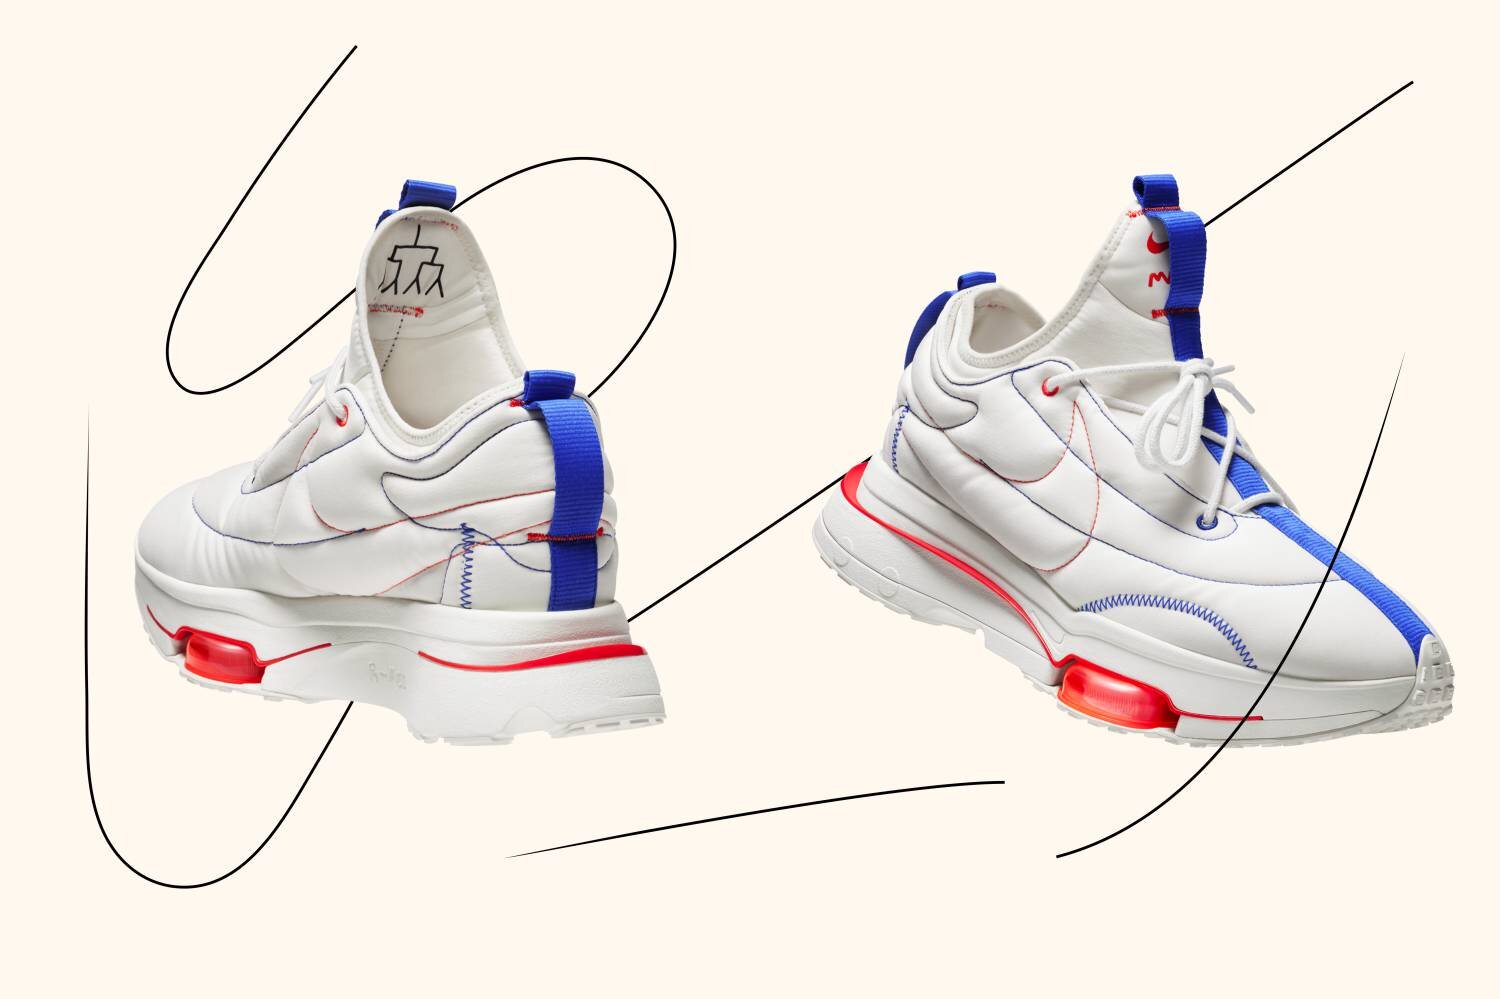 CEKAI's New Design At The NIKE BY YOU Platform